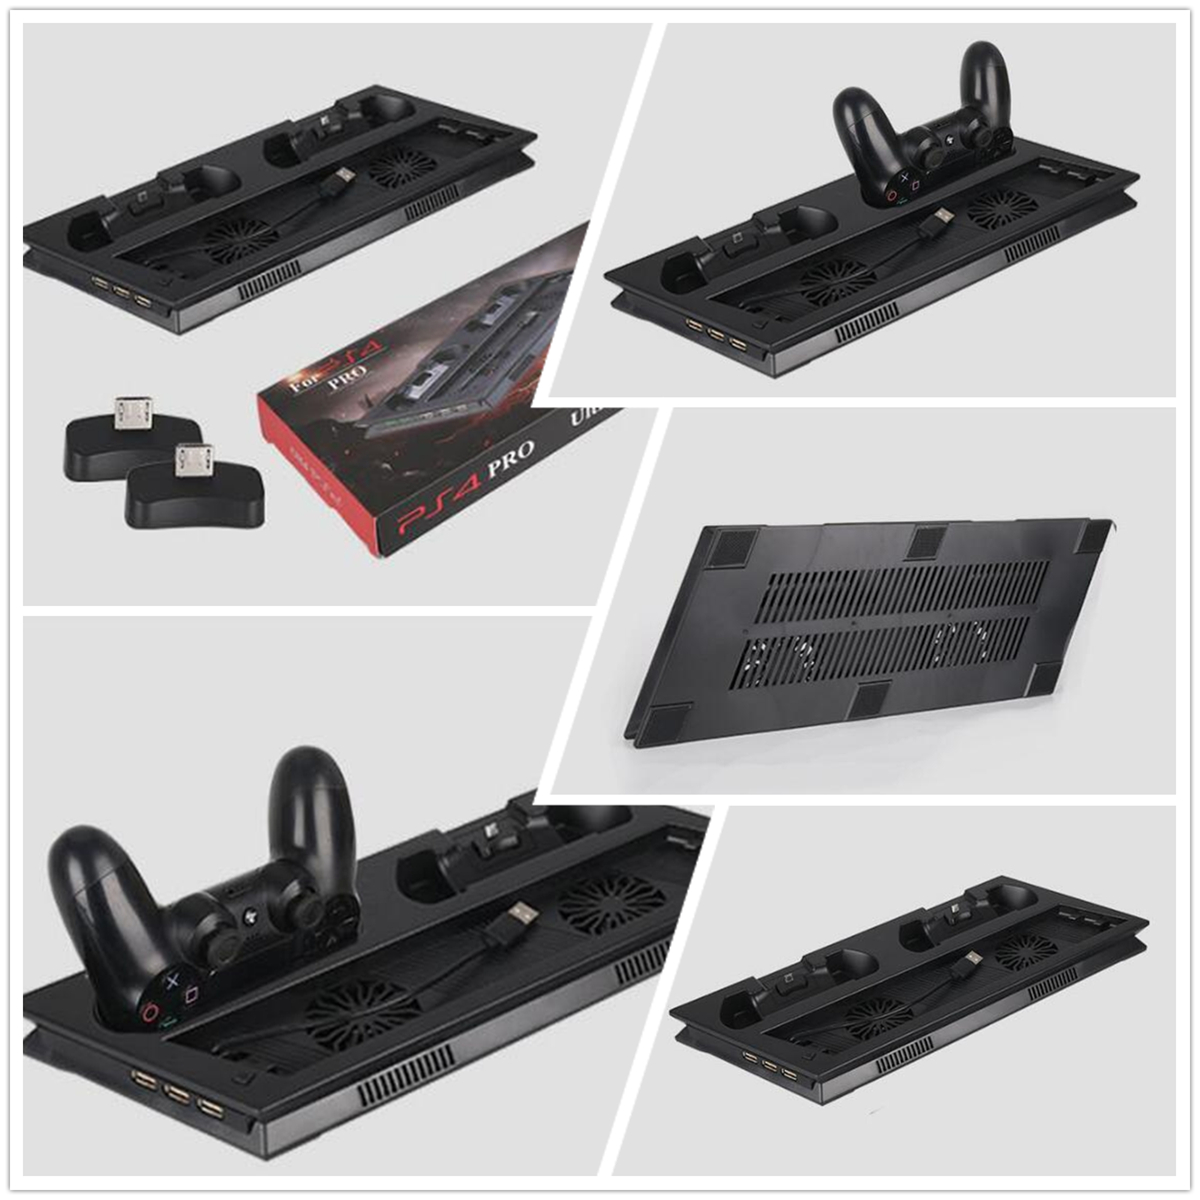 LED Charger Station Stand Charging Dock Cooling Fan for Sony Playstation 4 PS4 PRO Slim Game Console Gamepad 33